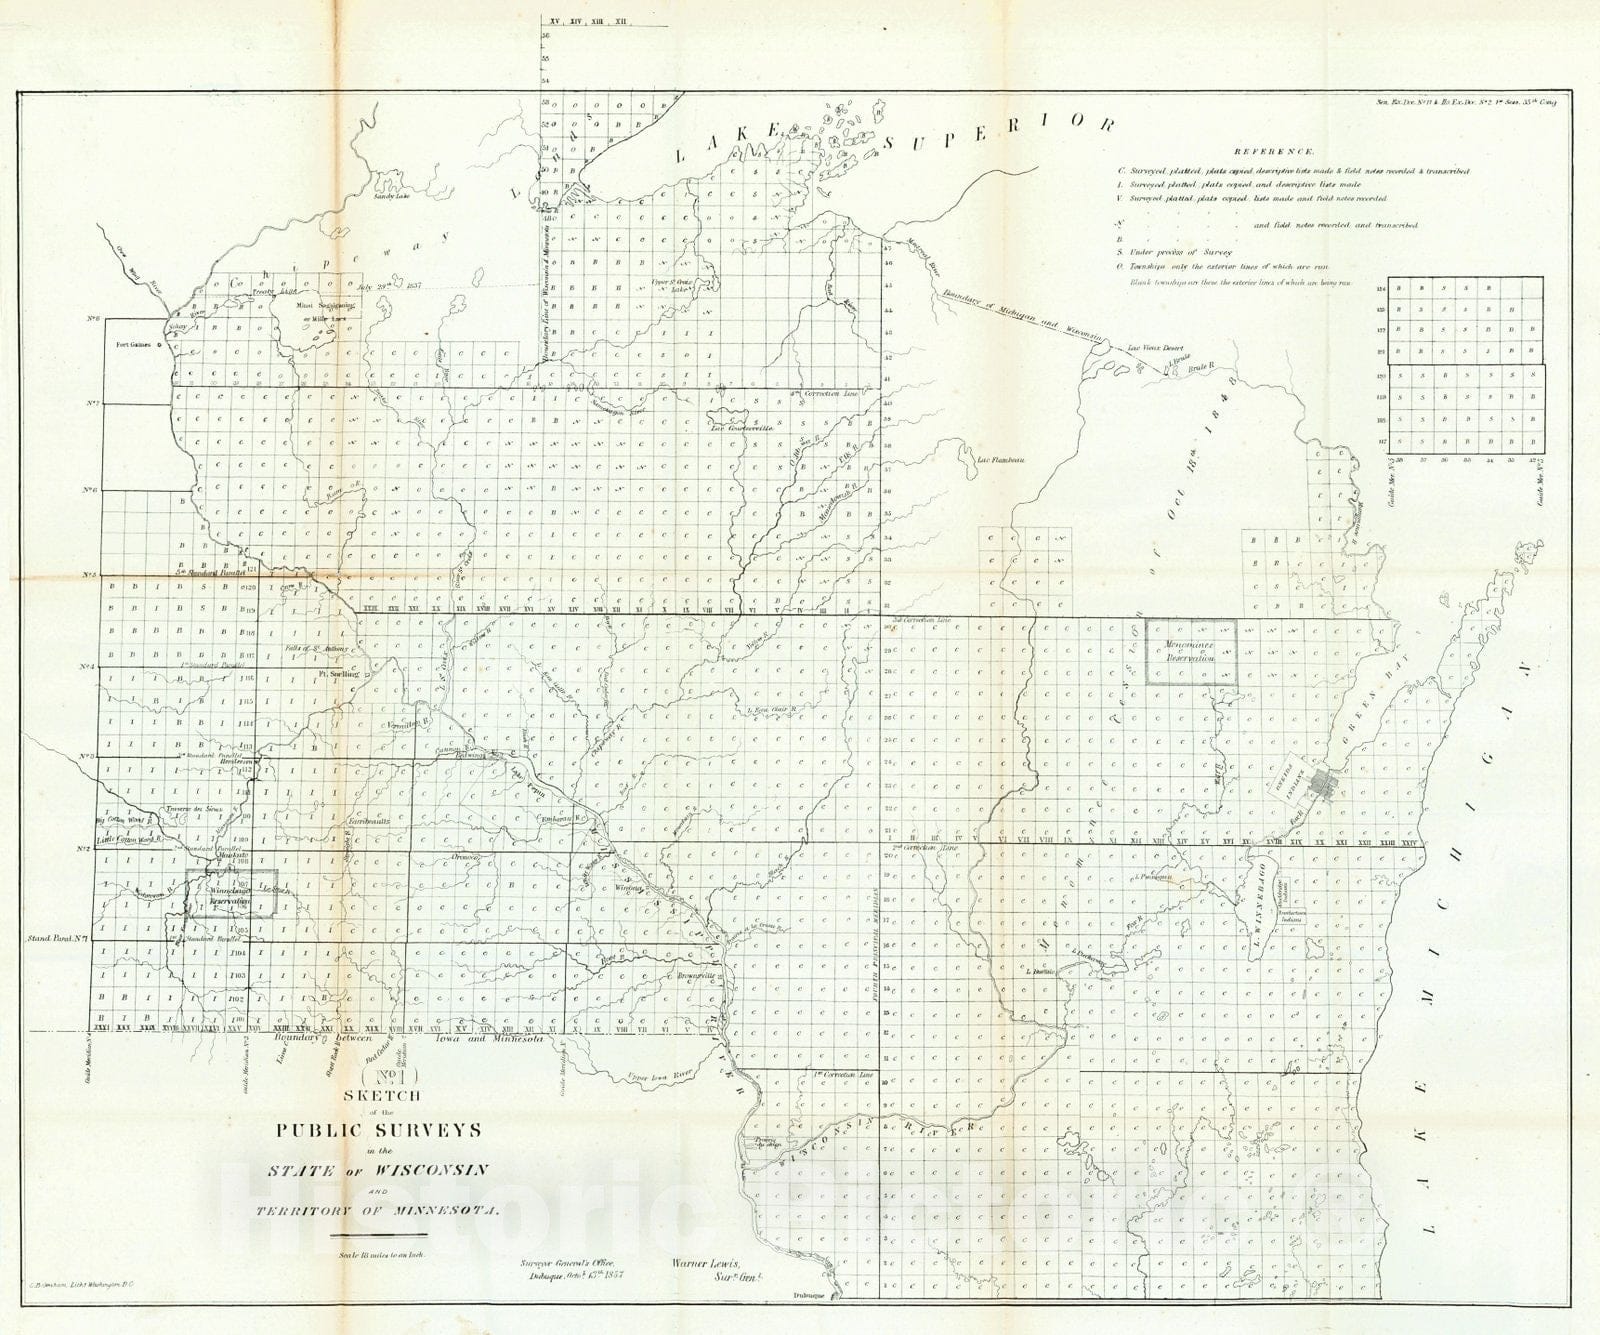 Historic Map : 1857 Sketch of the Public Surveys of the State of Wisconsin and Territory of Minnesota : Vintage Wall Art